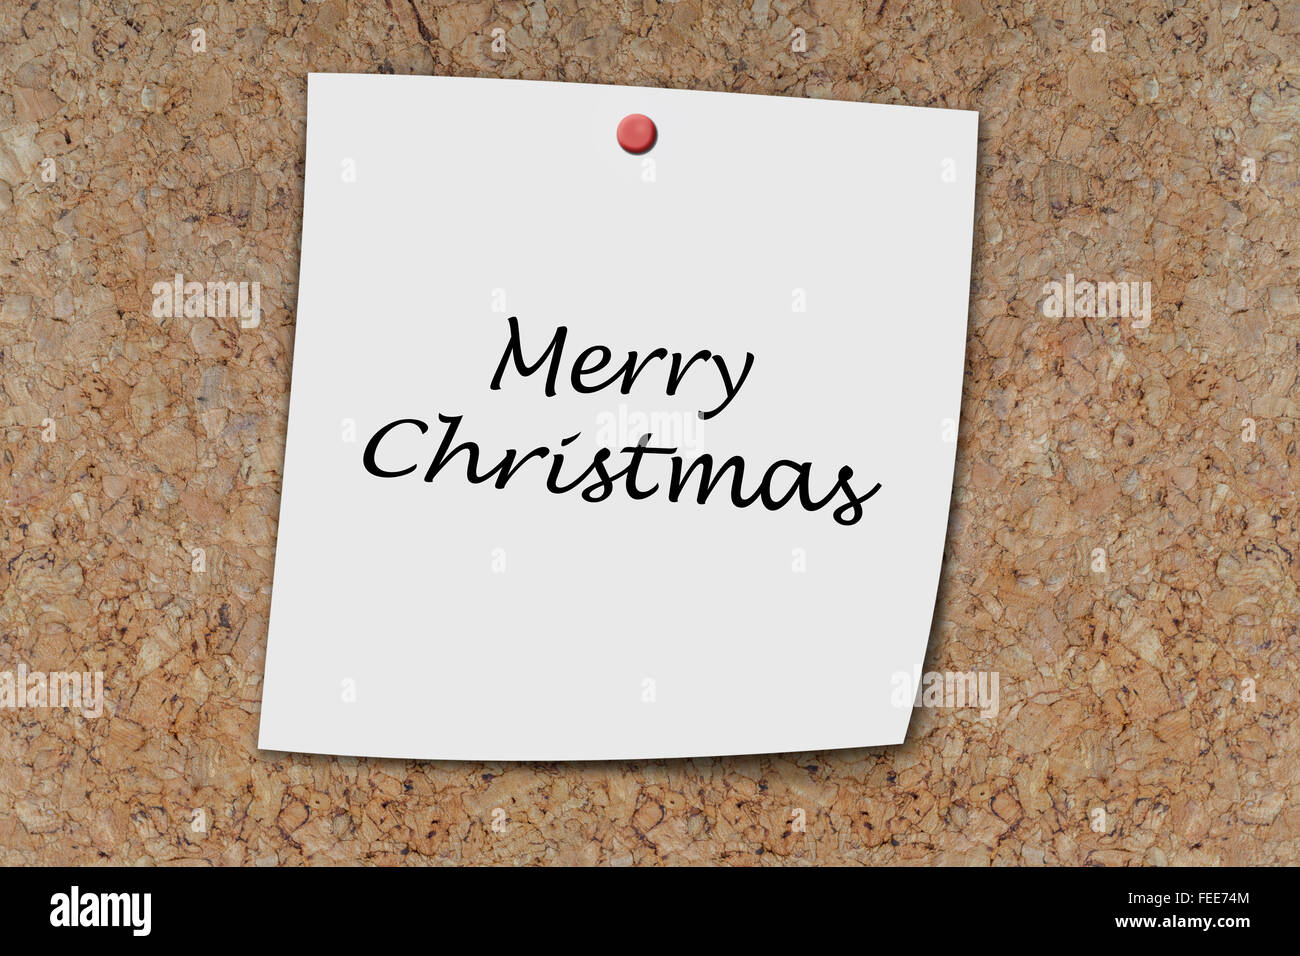 Merry christmas written on a memo pinned on a cork board Stock Photo